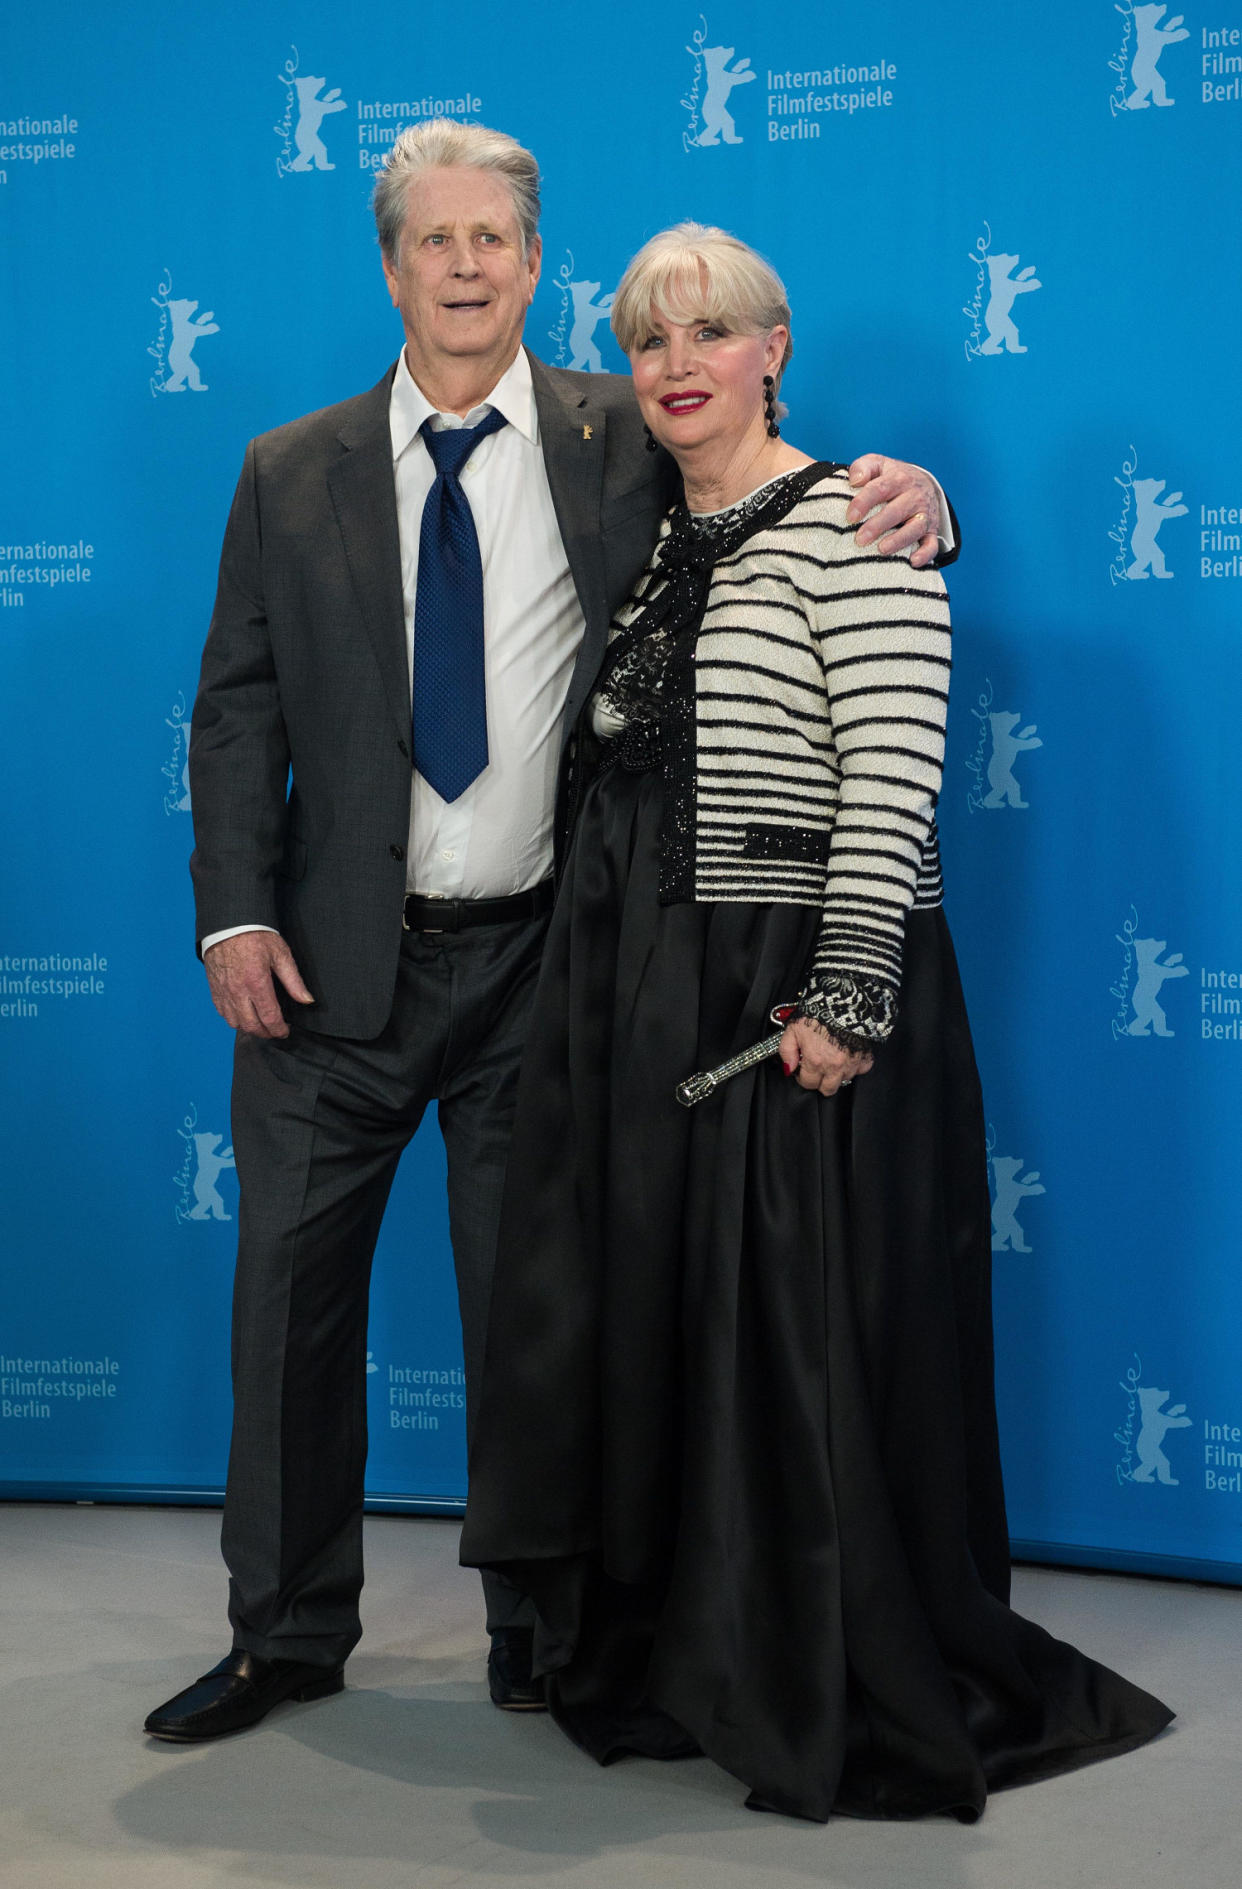 Musician Brian Wilson and his wife Melinda Ledbetter in Berlin on Feb. 8, 2015. (picture alliance / picture alliance via Getty Image)